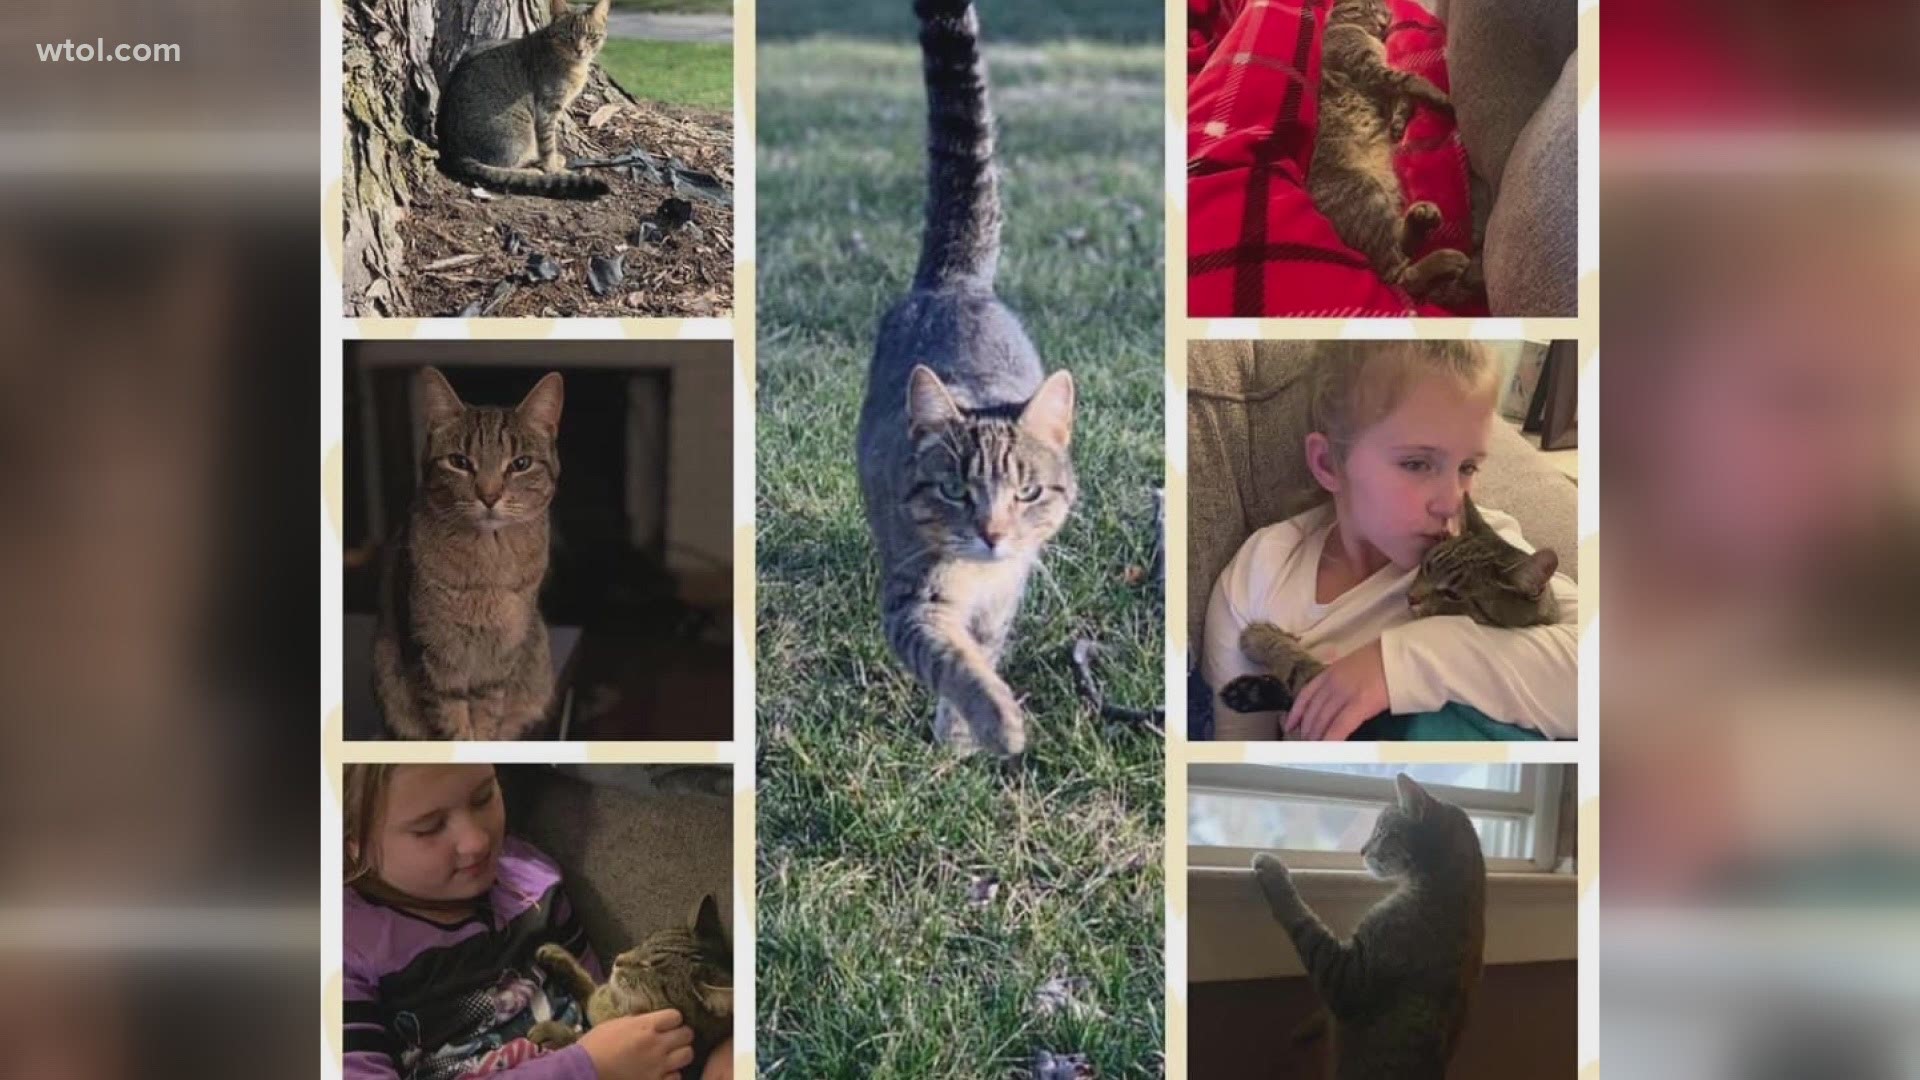 Ruby has been missing for a year and to ease her mind, Hailey Dixon wrote a book about all the adventures she thinks Ruby is on while away from her Ohio home.